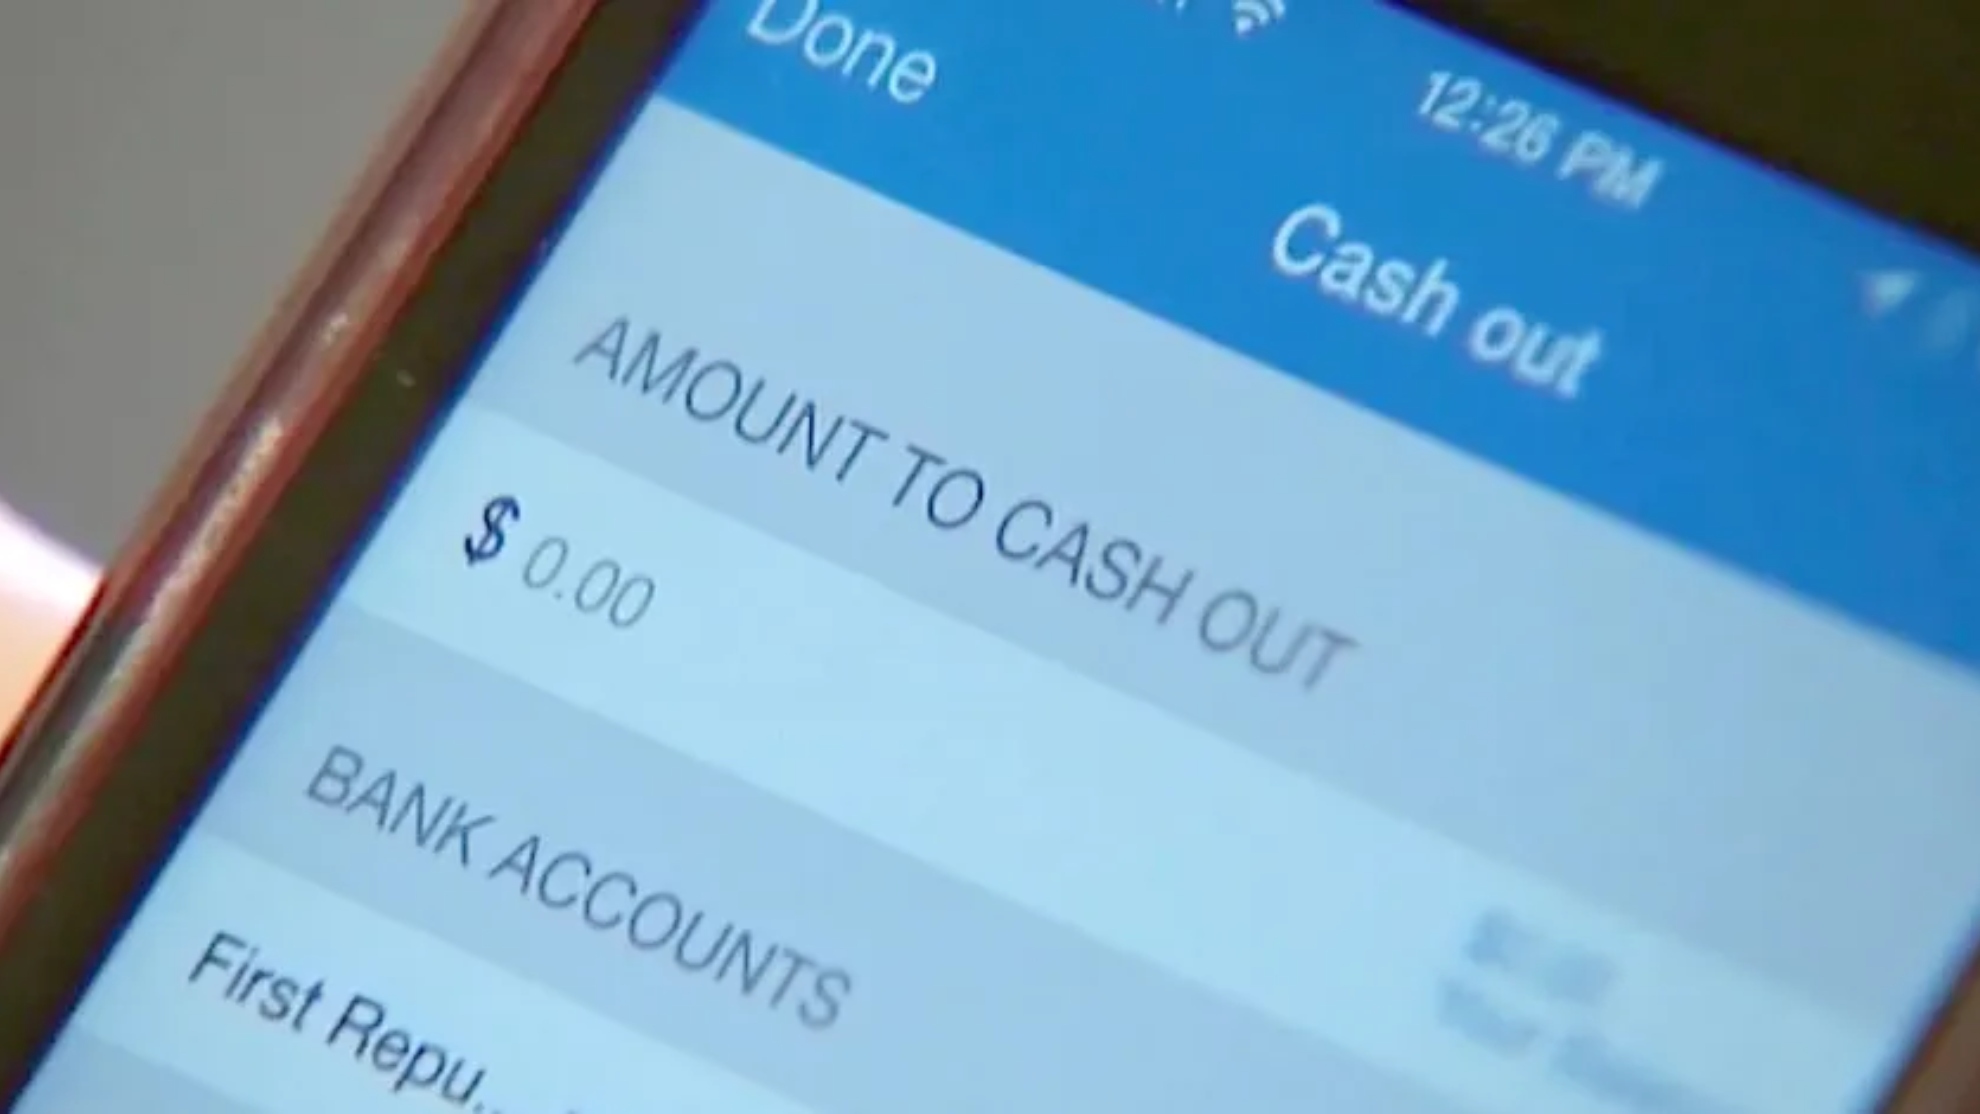 How does the IRS law work on $600 payments through apps?